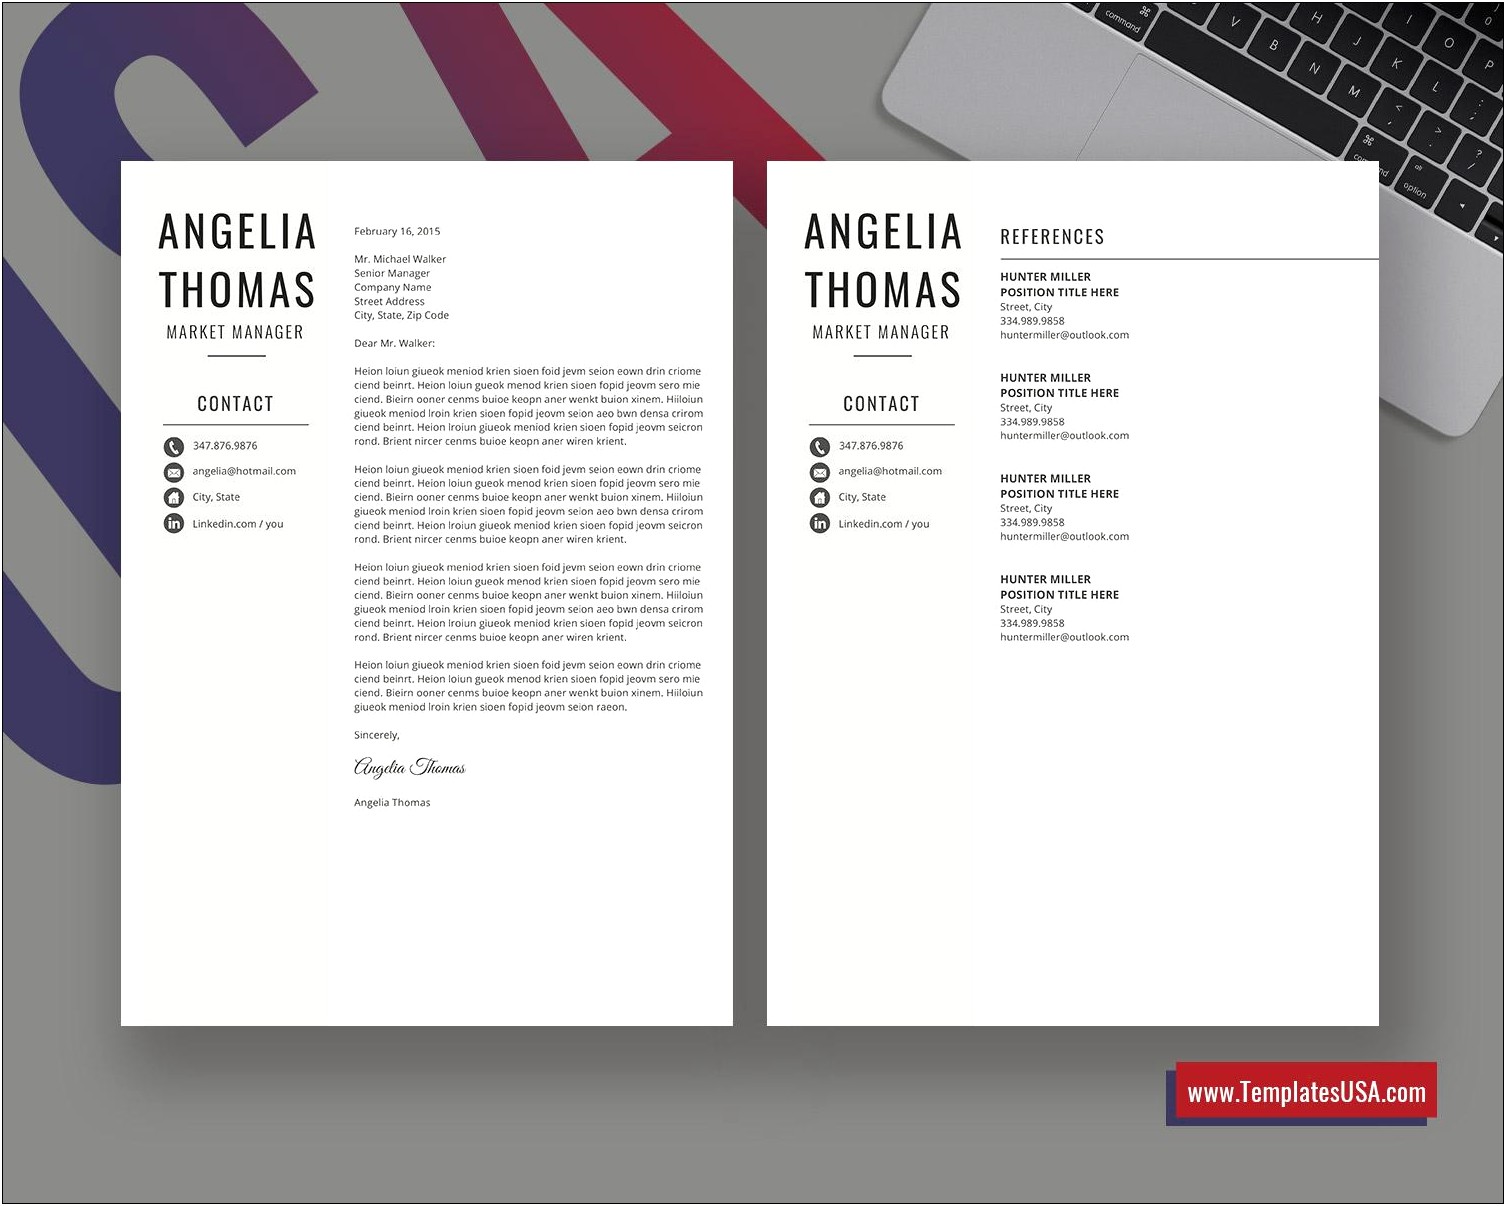 Microsoft Word Resume With References Template